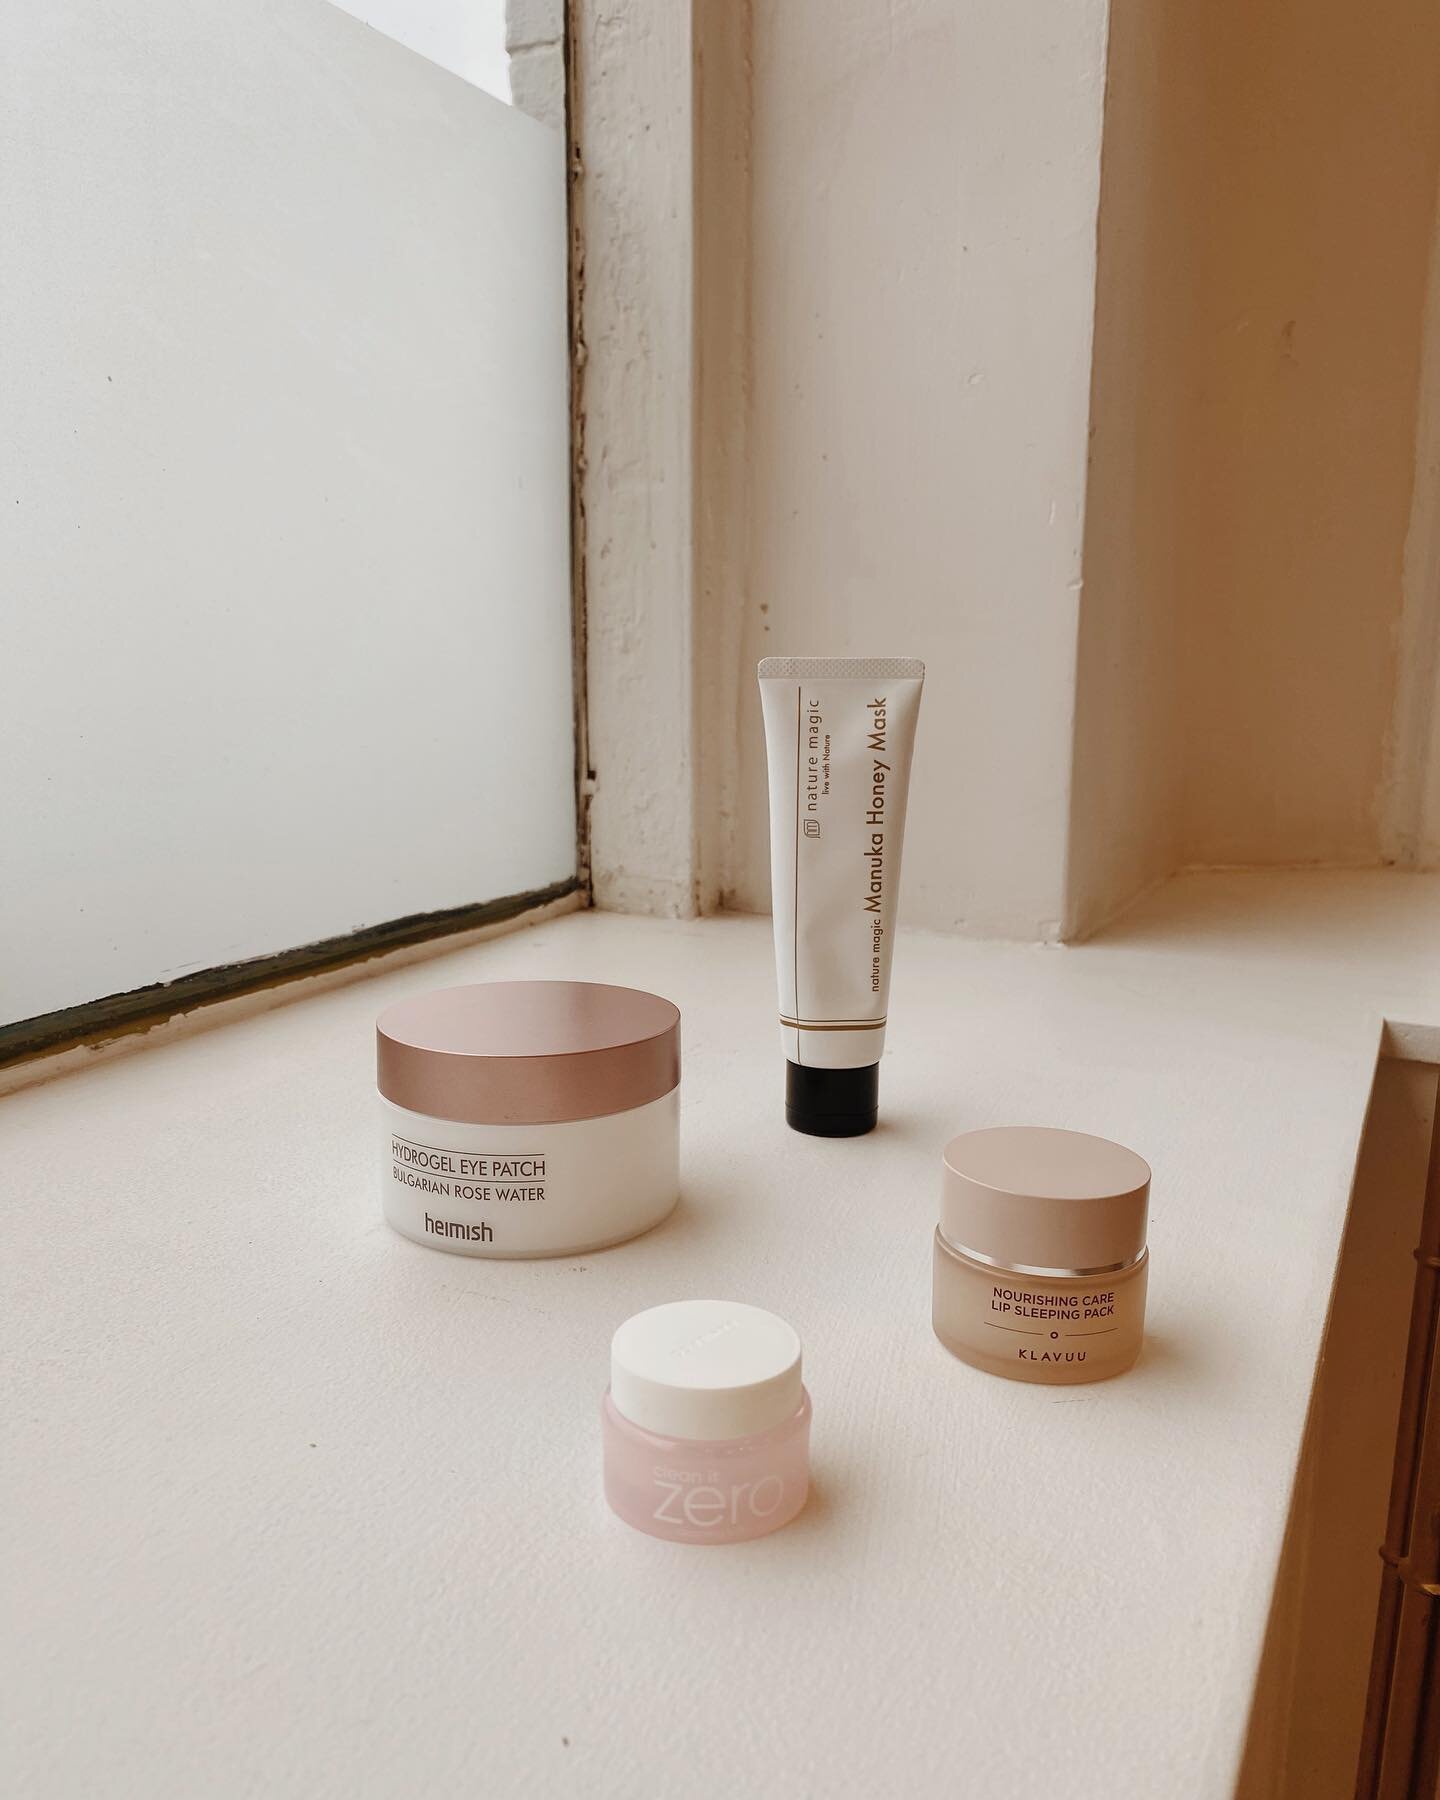 Meet our newest products of our #WinningSkin collection sourced from Korea &amp; Japan. 🛬 YUP, That means unless you want to pay for international shipping&mdash; we&rsquo;ve taken care of that for youuuu 😉 Something about new products on the skinc